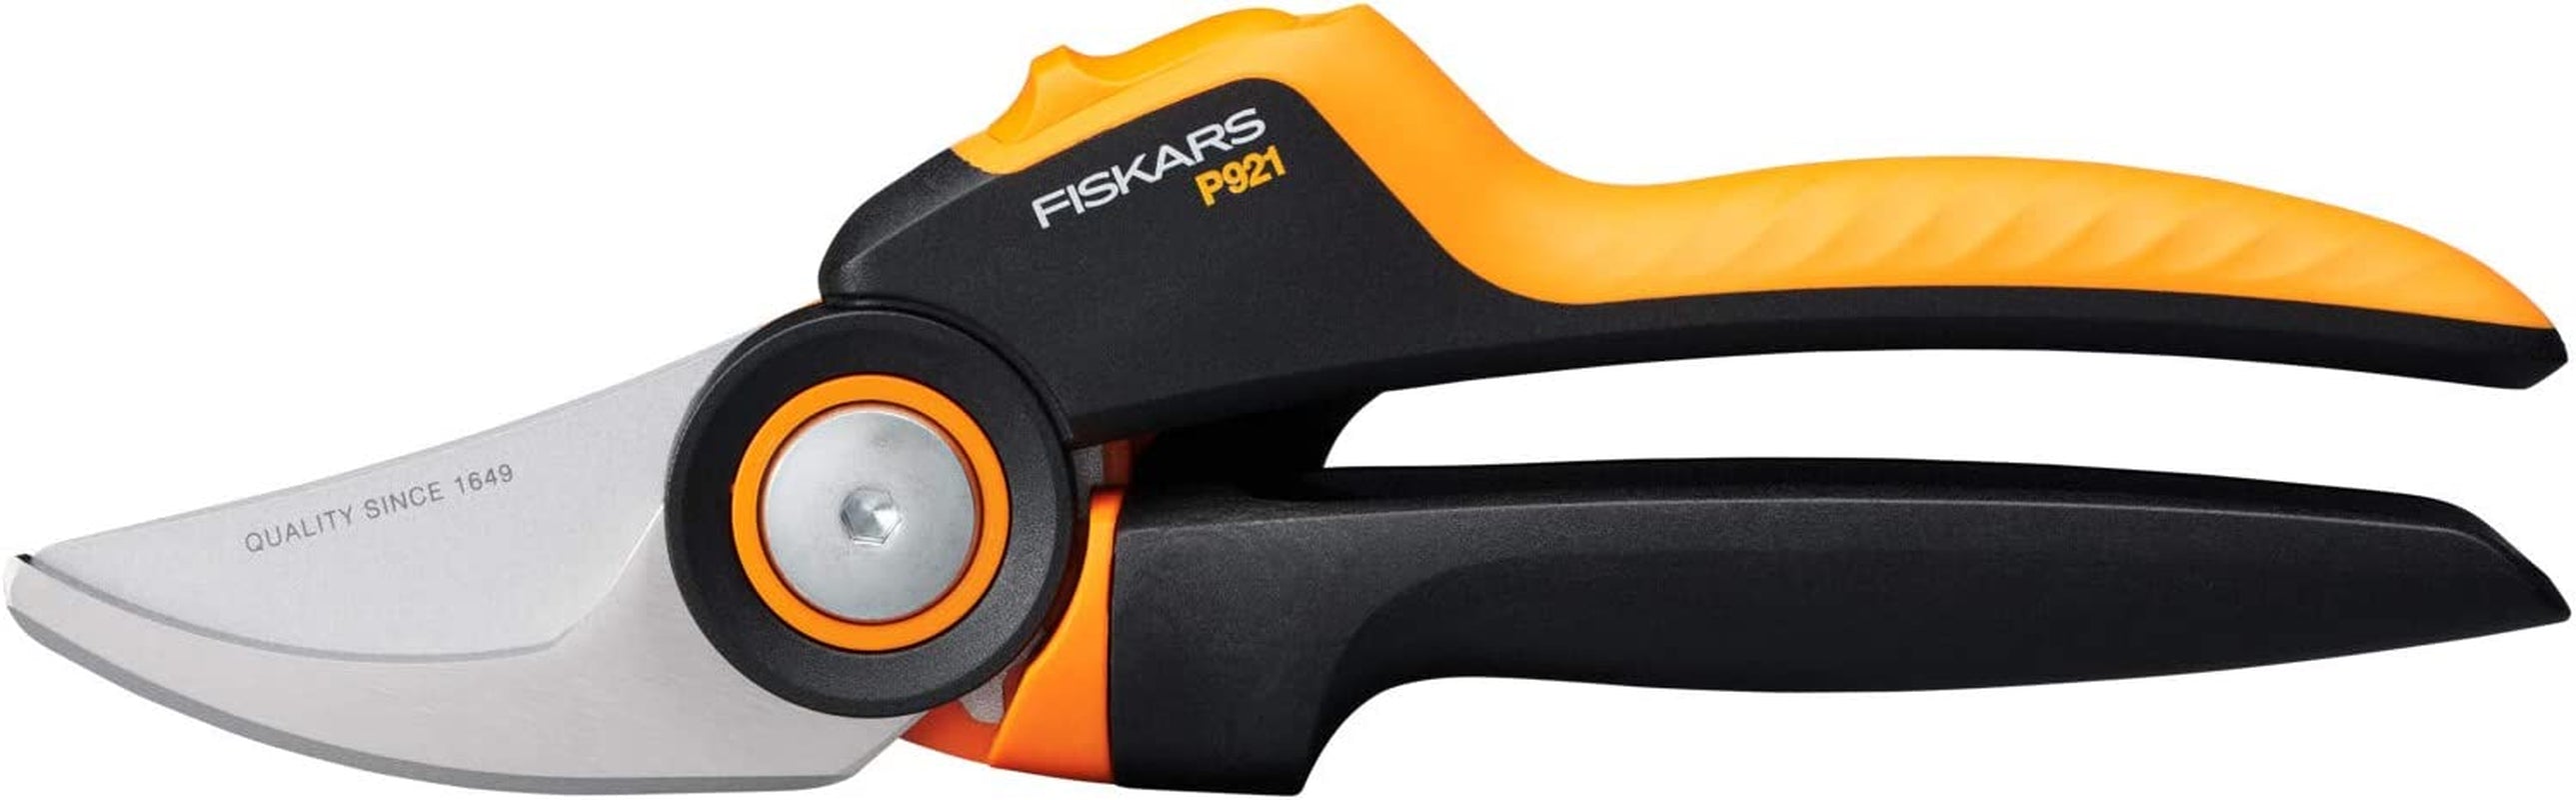 Fiskars, Fiskars Bypass Gardening Shears M, X-Series Powergear, P921, with Rolling Handle, for Fresh Branches and Twigs, Non-Stick Coated, Stainless Steel Blades, Length: 20.1 Cm, Black/Orange, 1057173